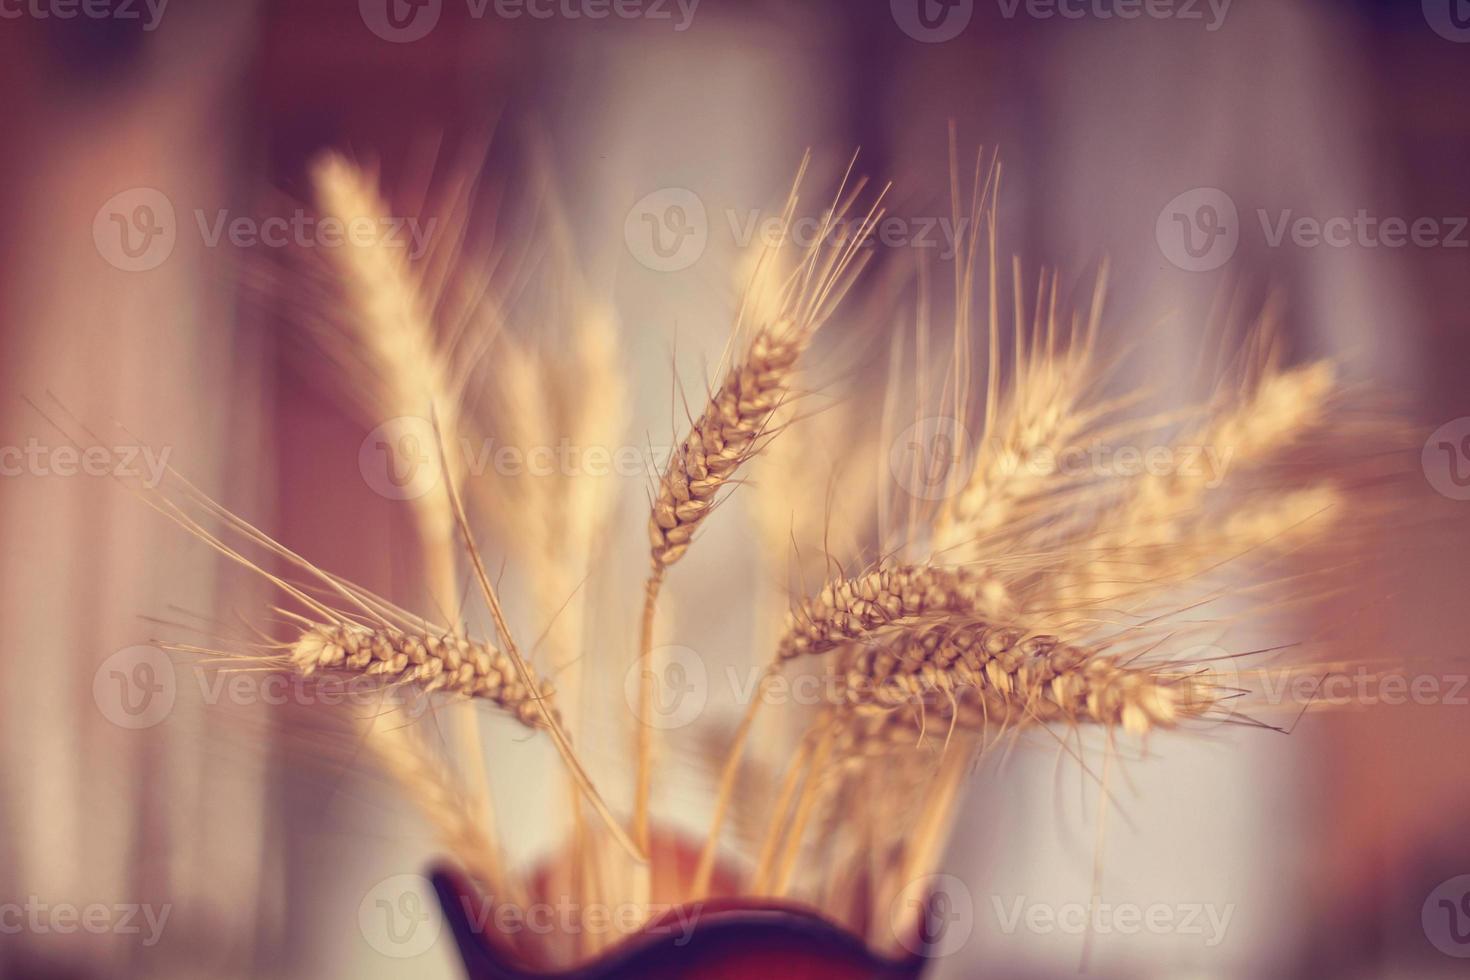 Wheat in a vase photo